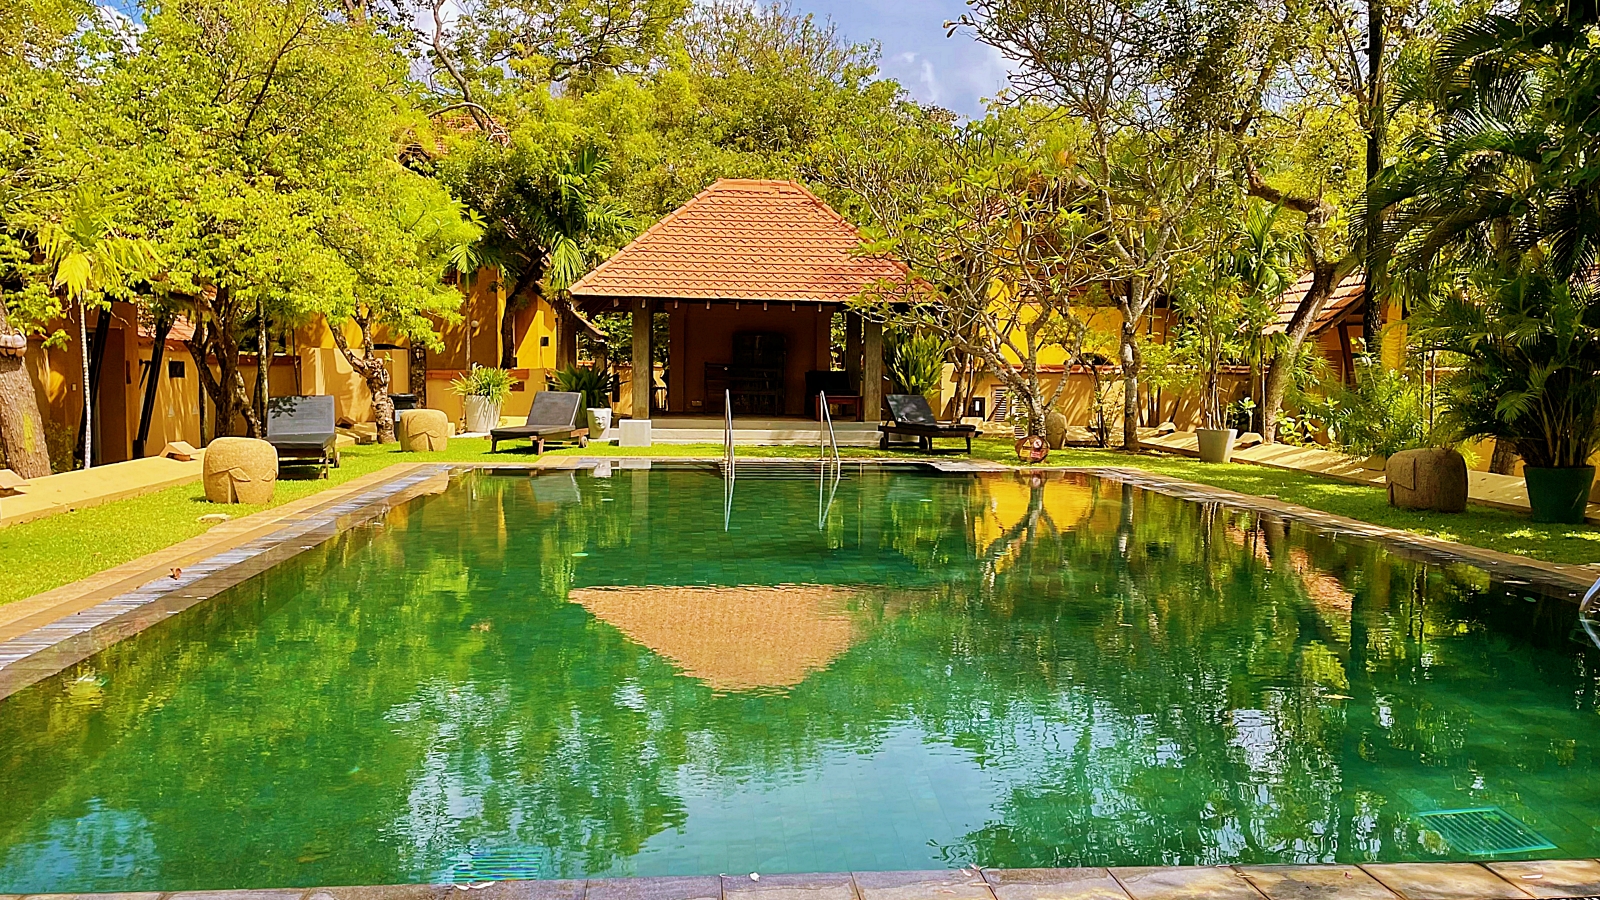 Jetwing Ayurveda Pavilions: An Ayurvedic Day Out!